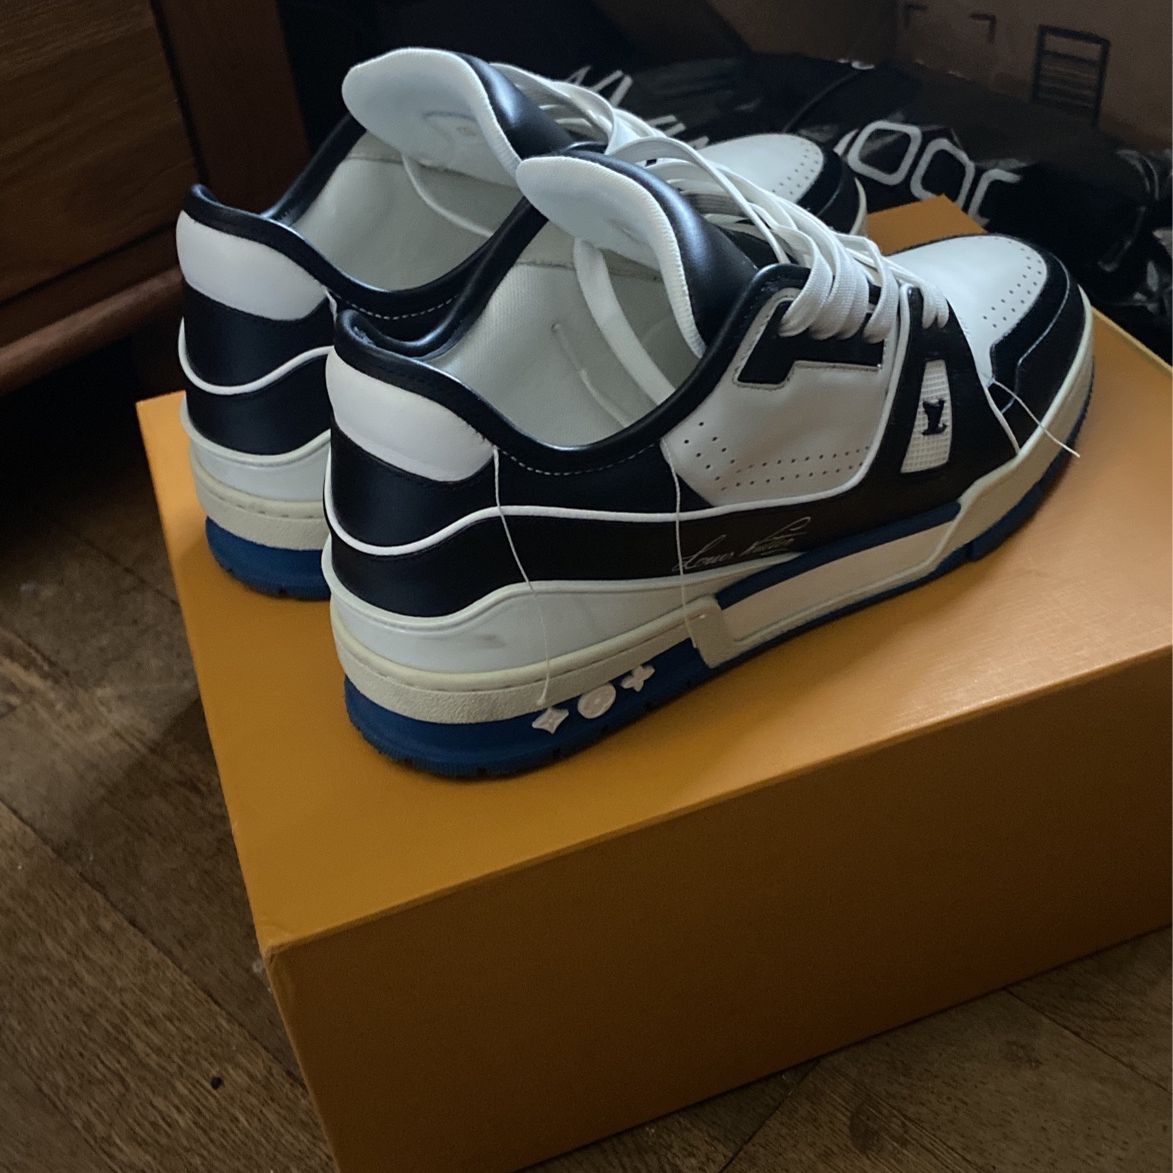 Louis Vuitton Trainer Low Size 9 Men for Sale in Perris, CA - OfferUp